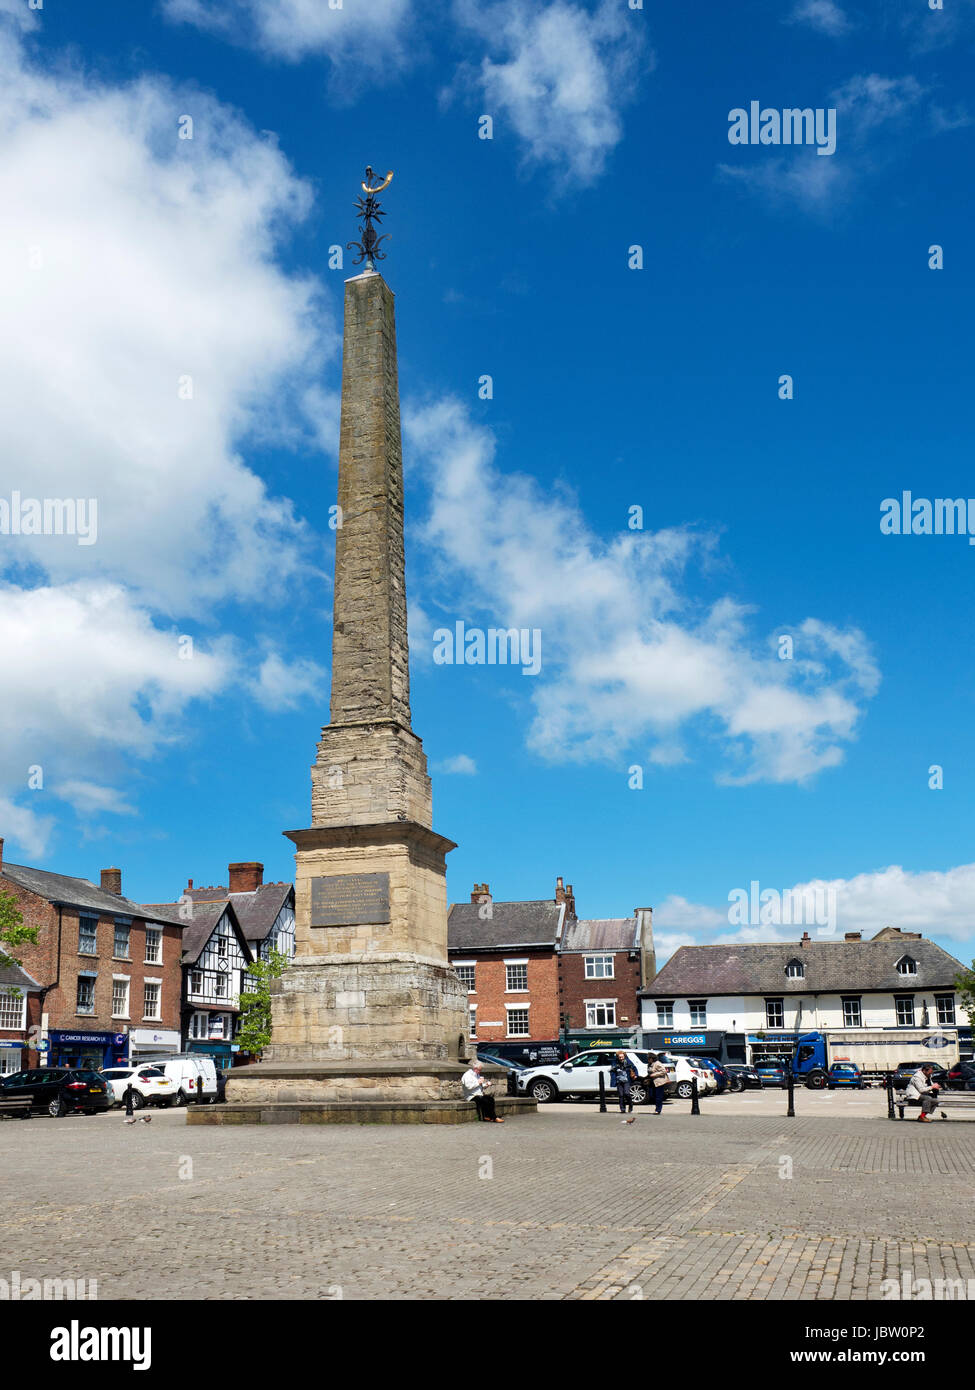 Obelisk in the Market Place Ripon North Yorkshire England Built 1702 it is the earliest surviving free standing monumental obelisk in Great Britain Stock Photo